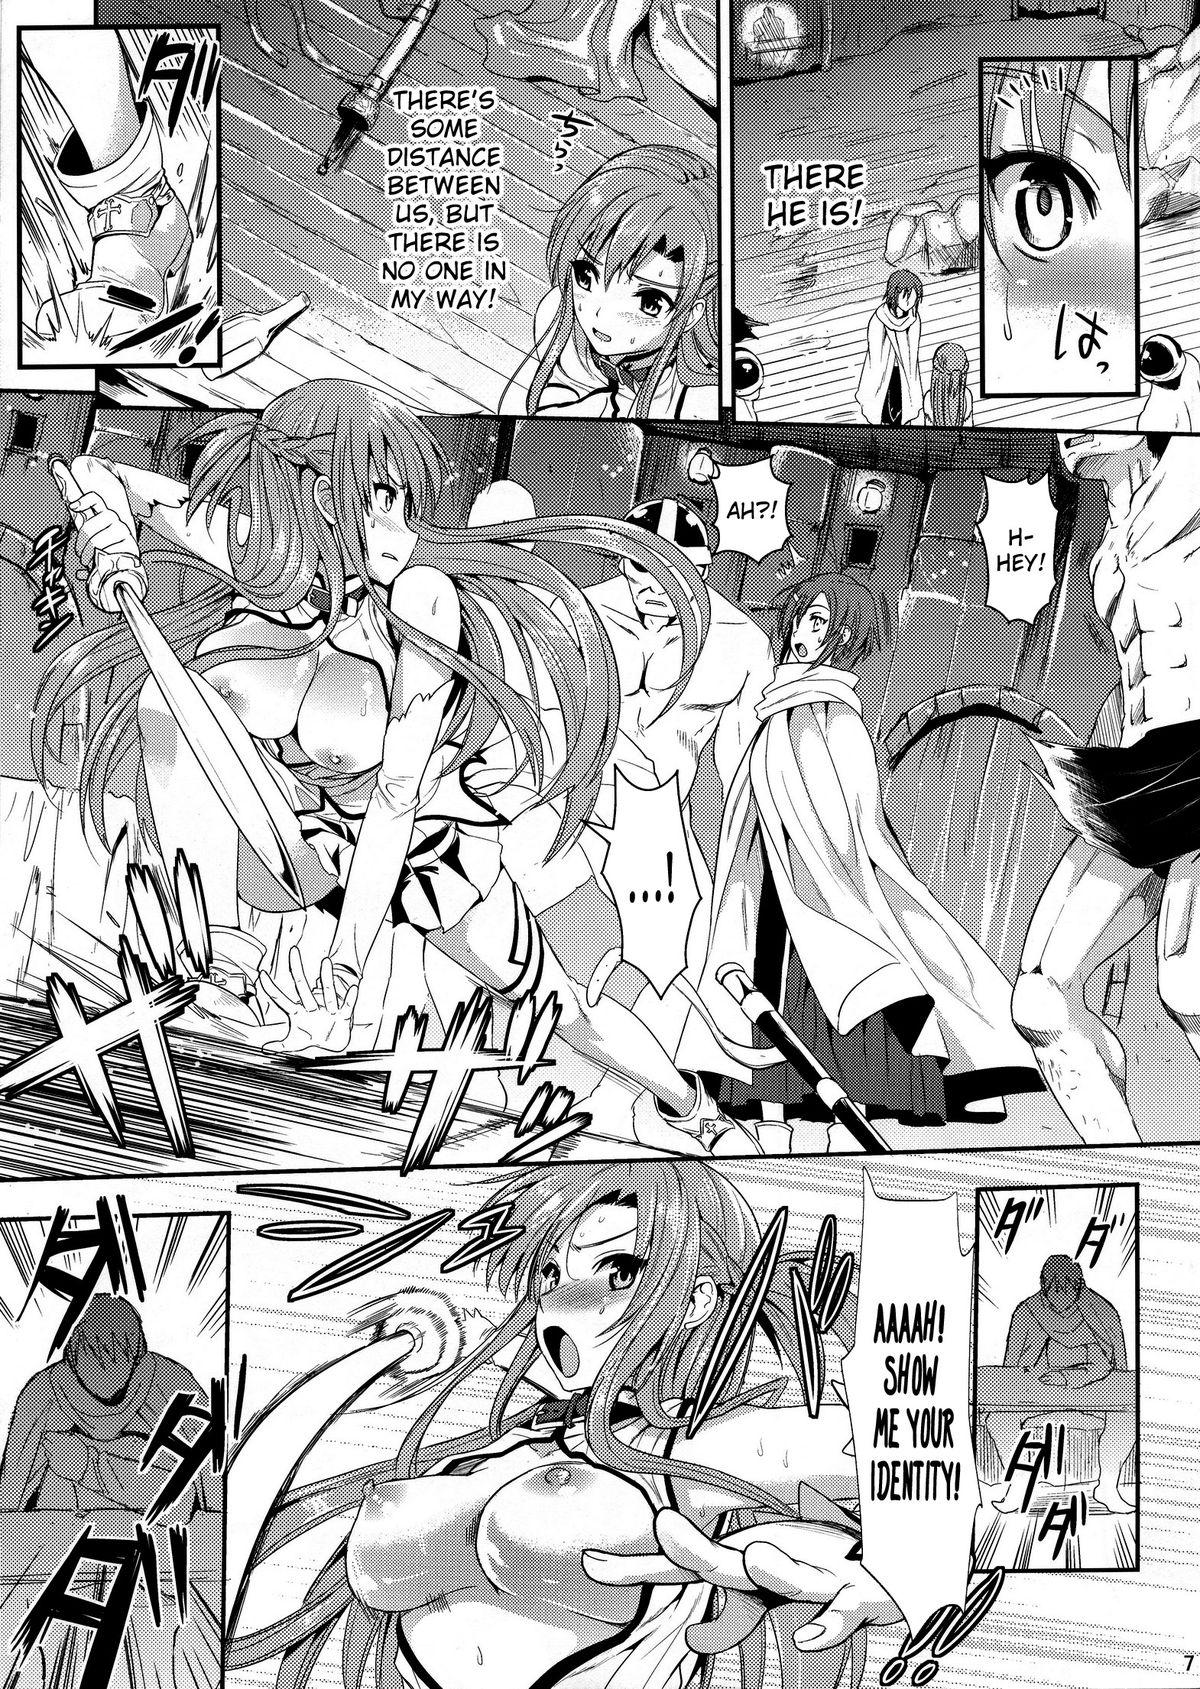 Ex Gf Shujou Seikou II β | Captive Sex II β - Sword art online Tiny Girl - Page 6